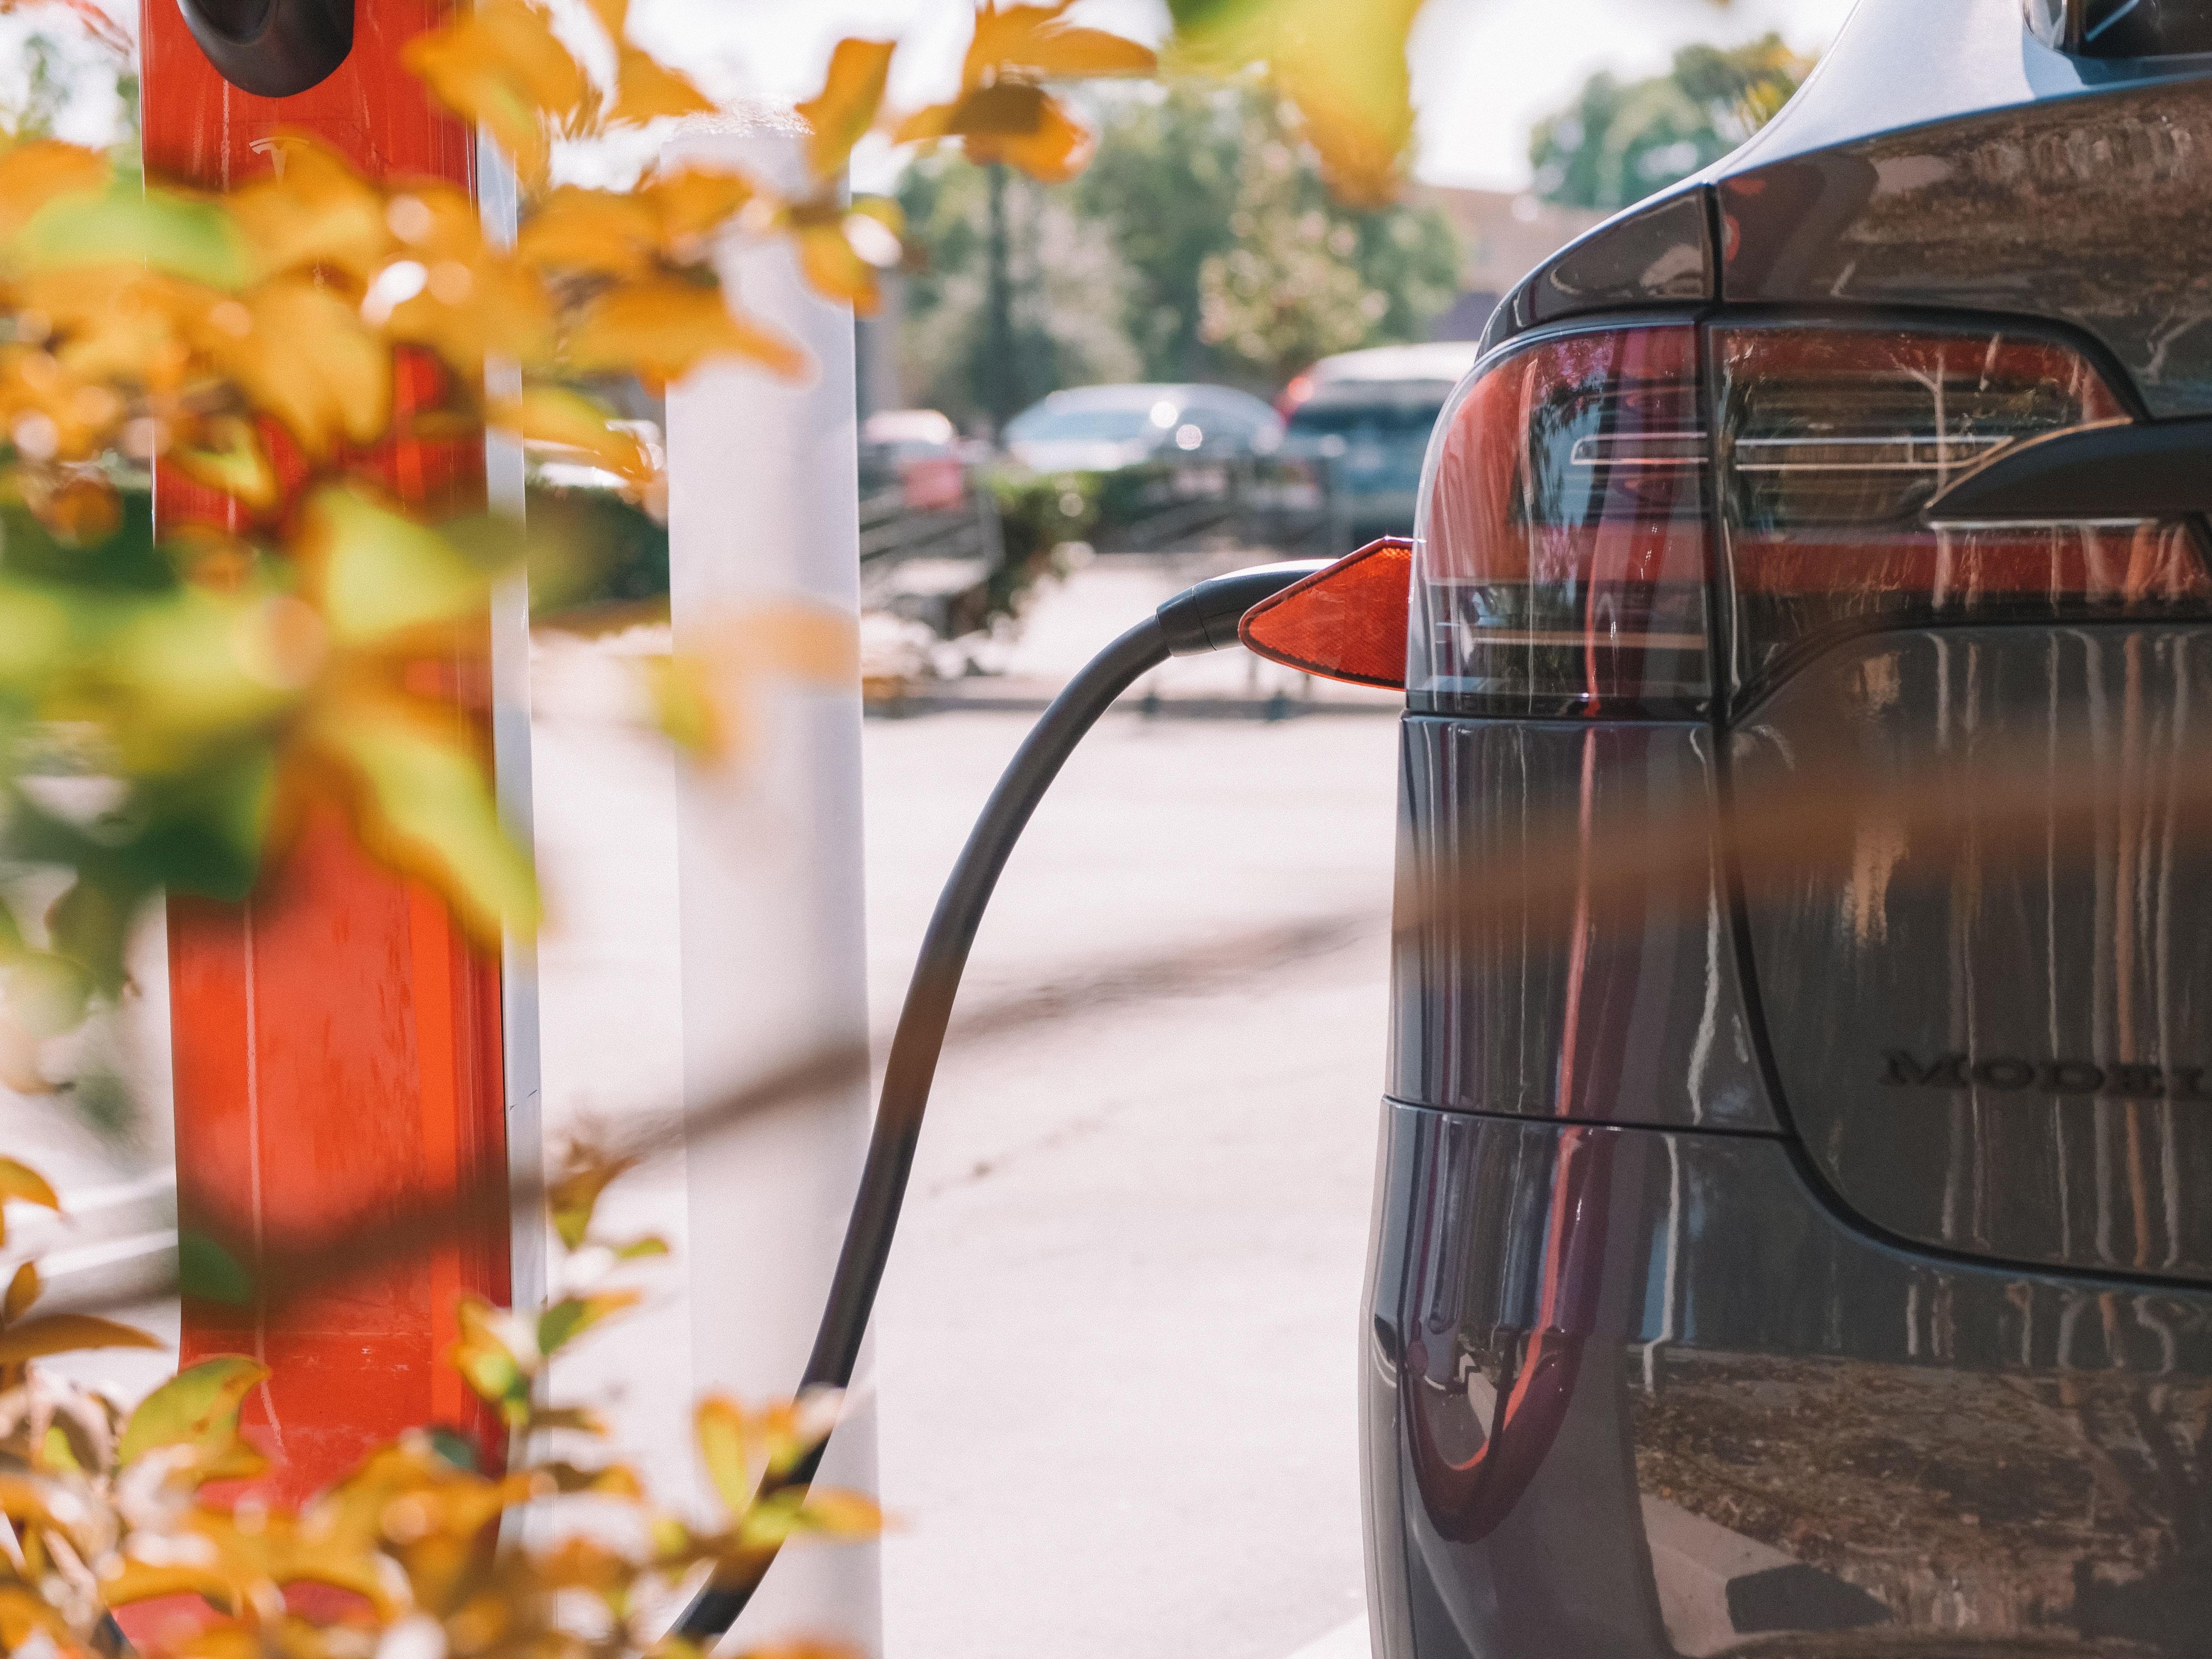 Low on energy, not just for you but your Tesla too? Re-energize with a great night sleep & "fill up" with conveniently located Tesla Charging Stations